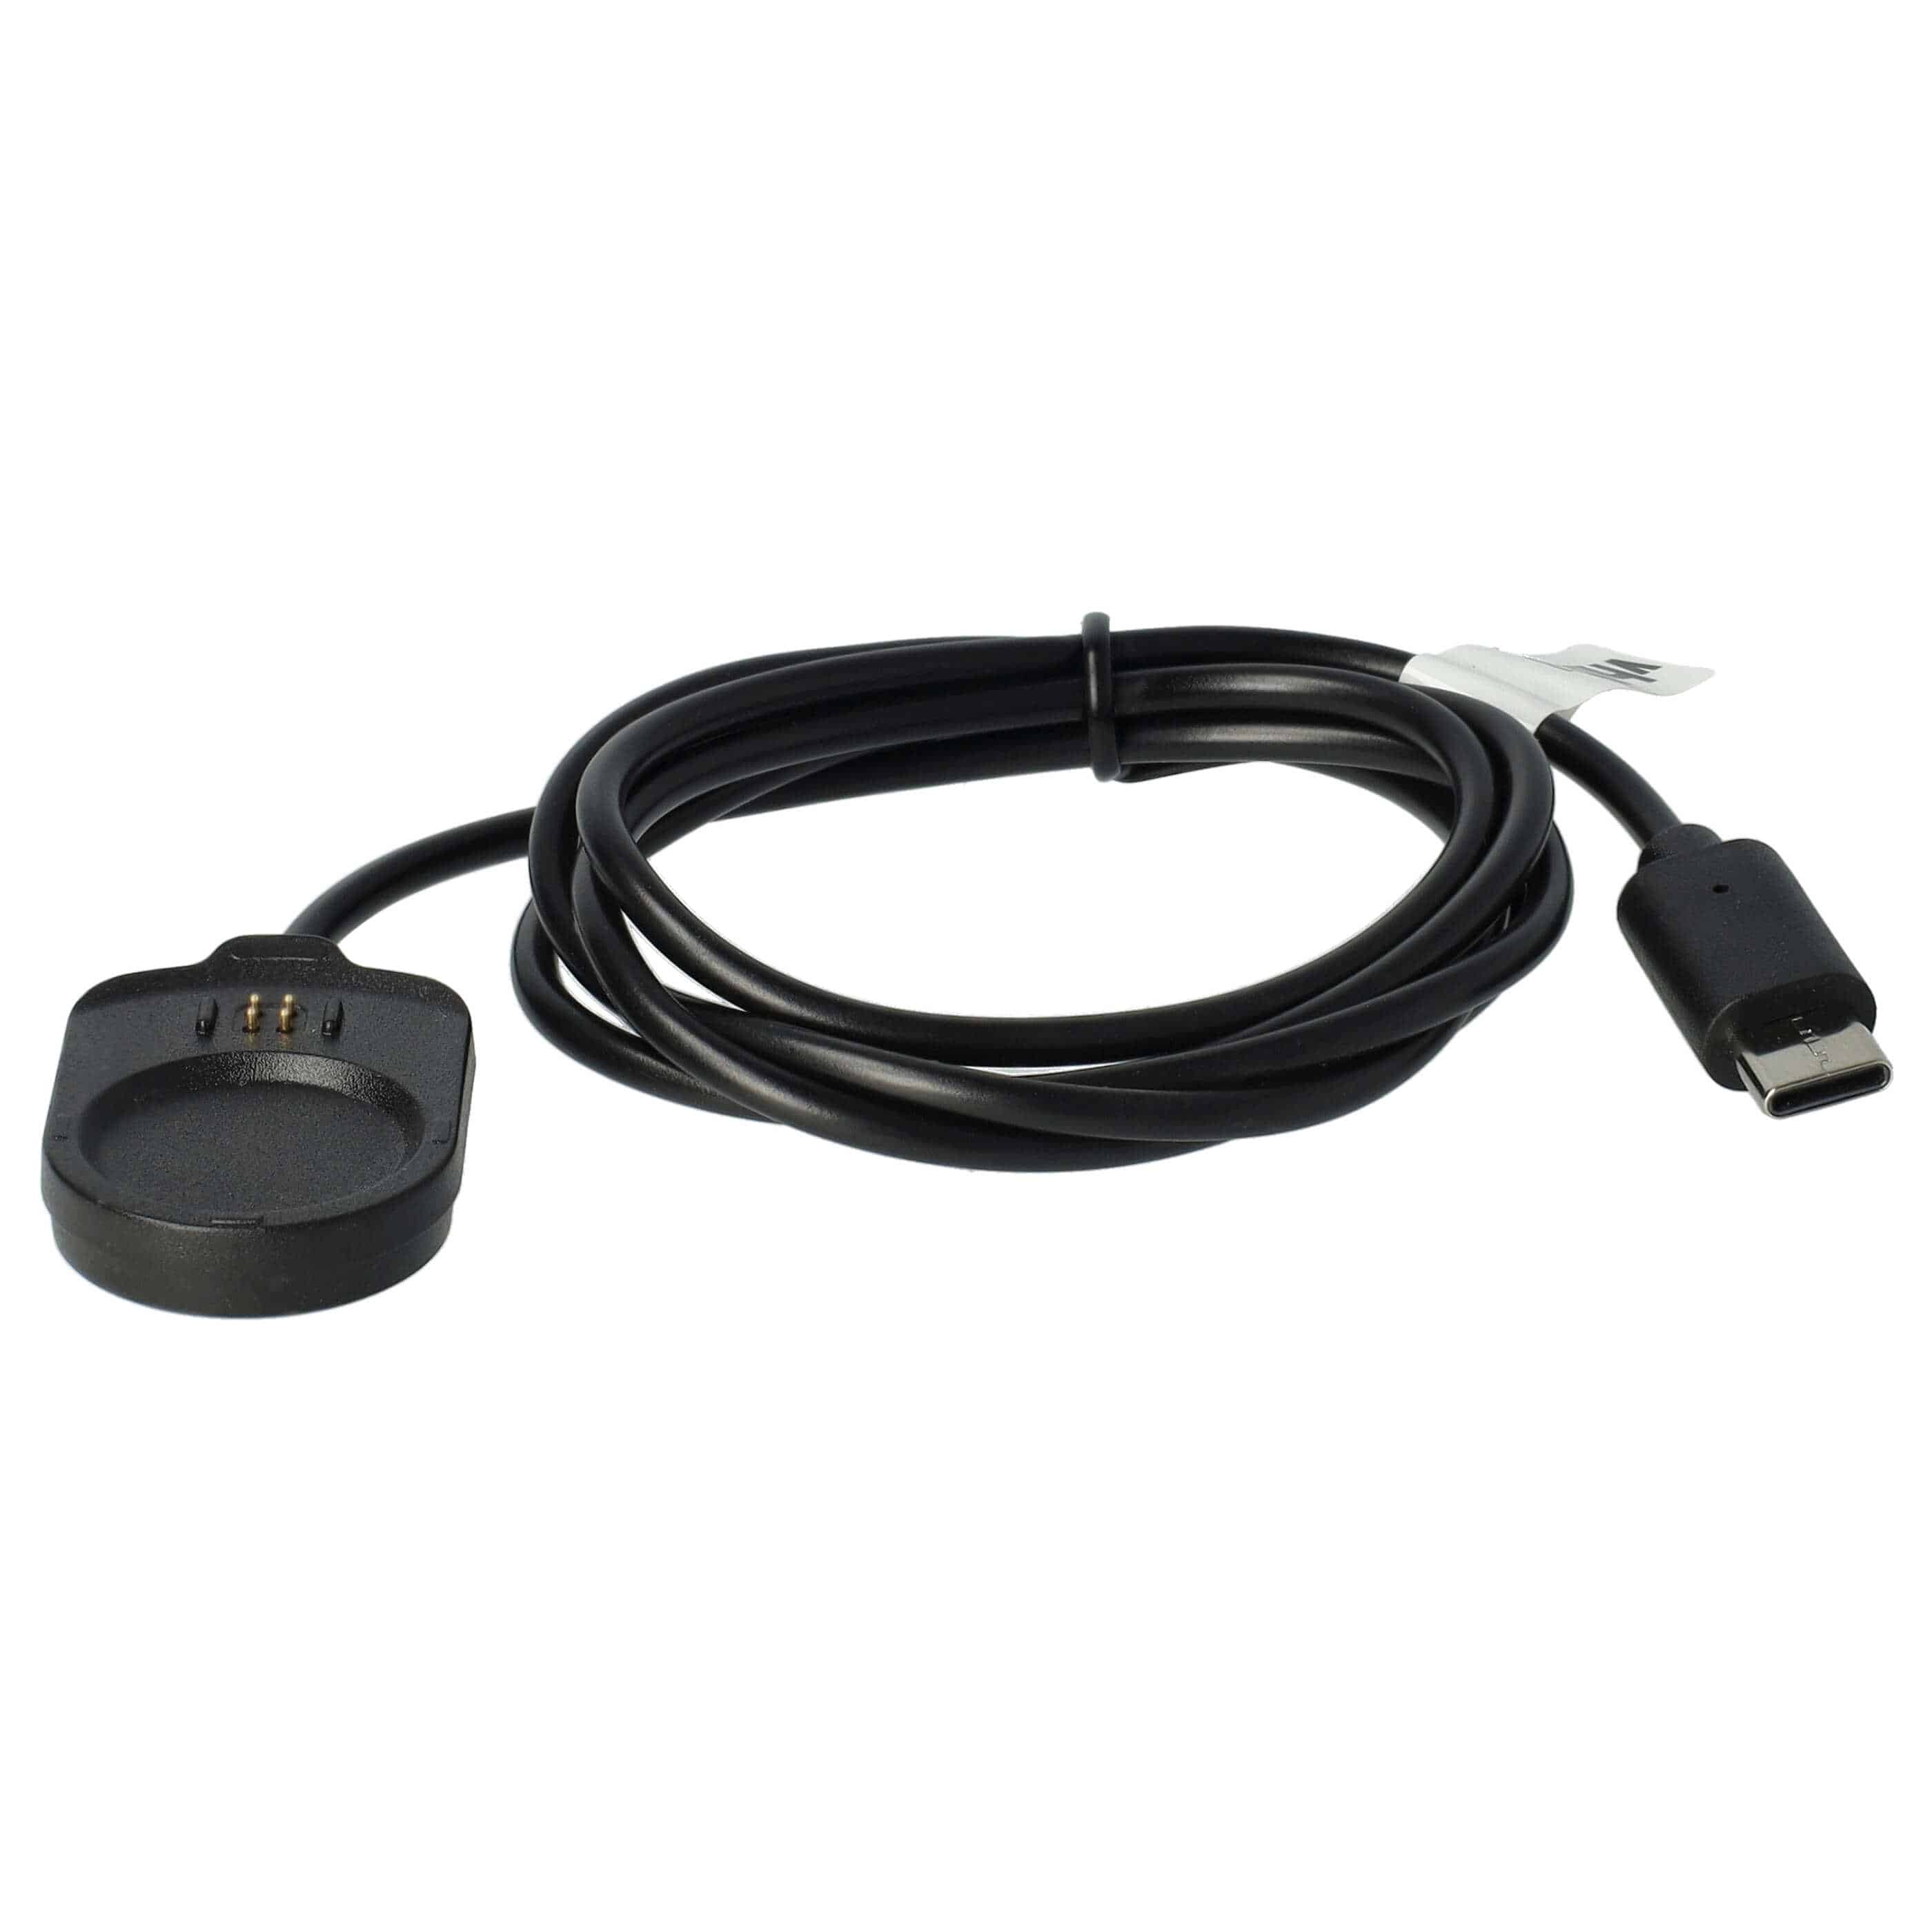 Charging Station replaces Garmin 010-13225-14 for Garmin Fitness Tracker - Cable, 100cm, black